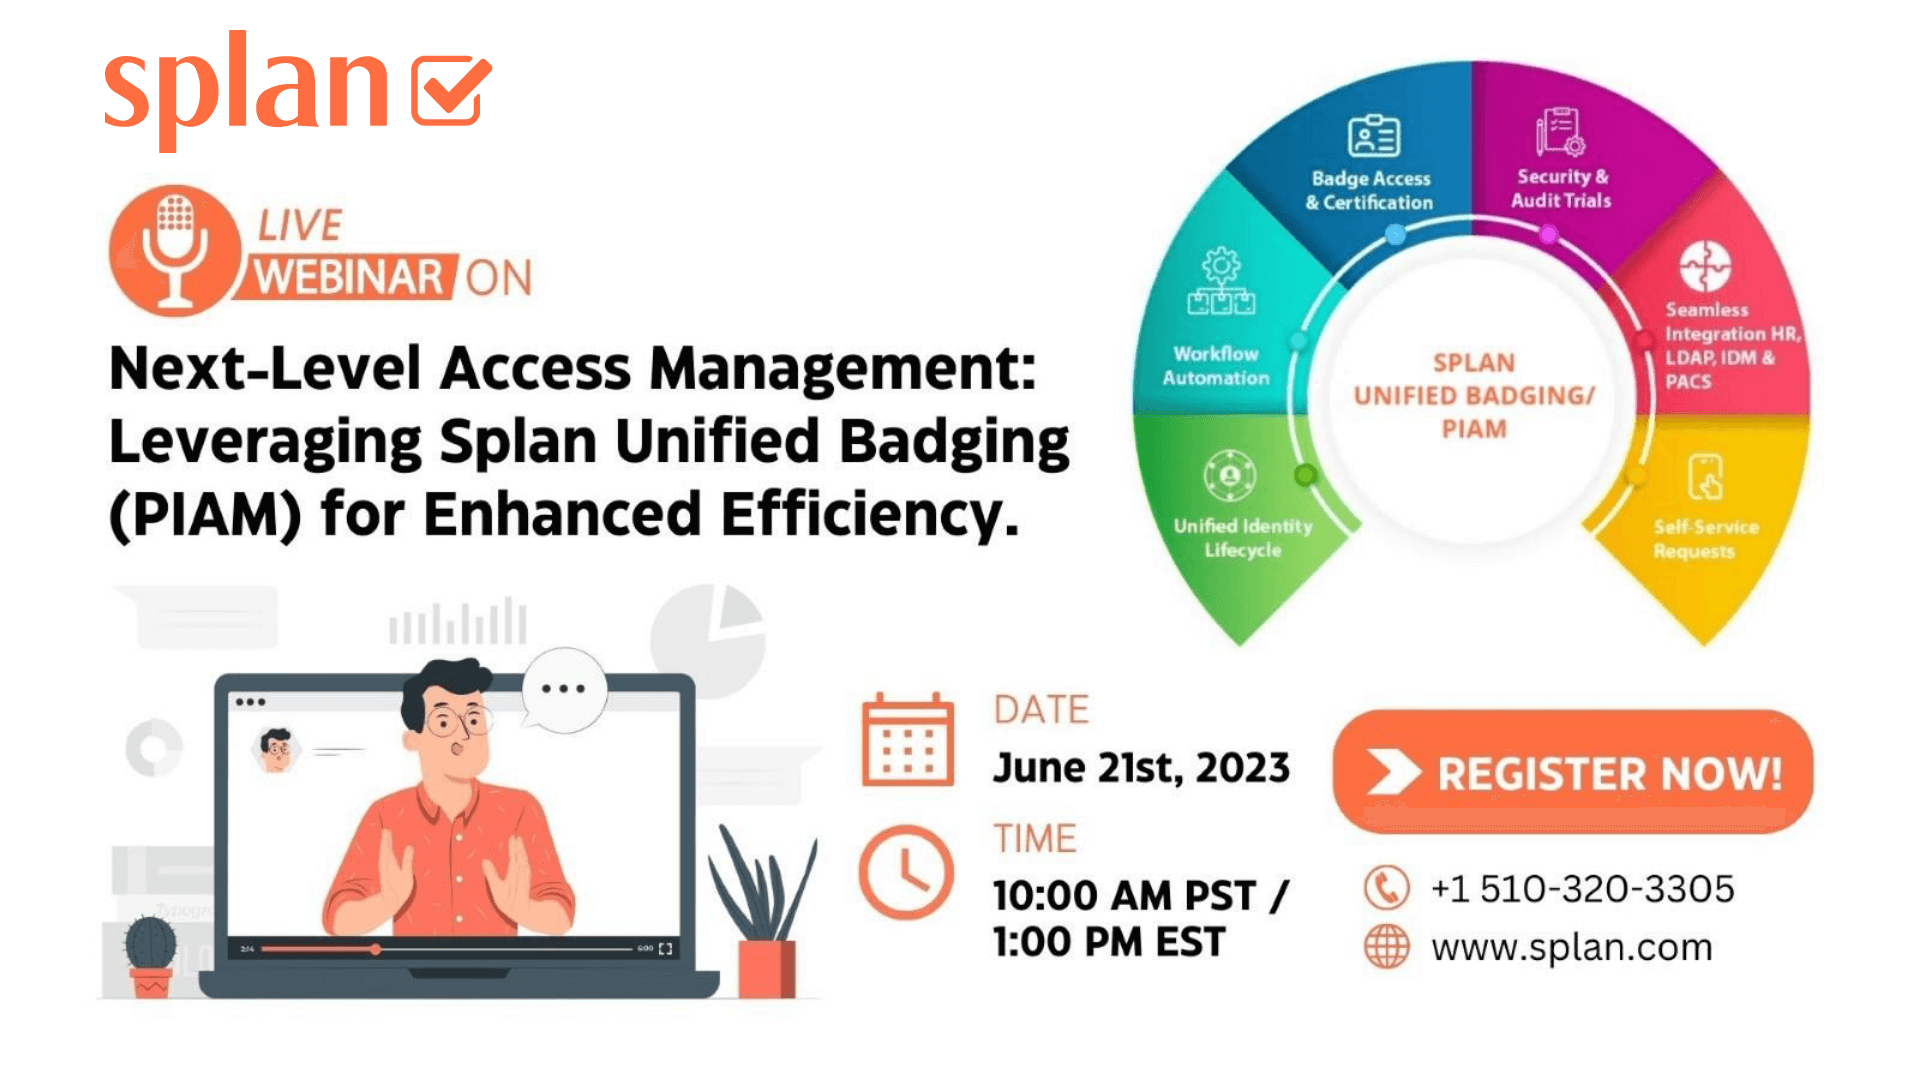 Next-Level Access Management: Leveraging Splan Unified Badging (PIAM) for Enhanced Efficiency